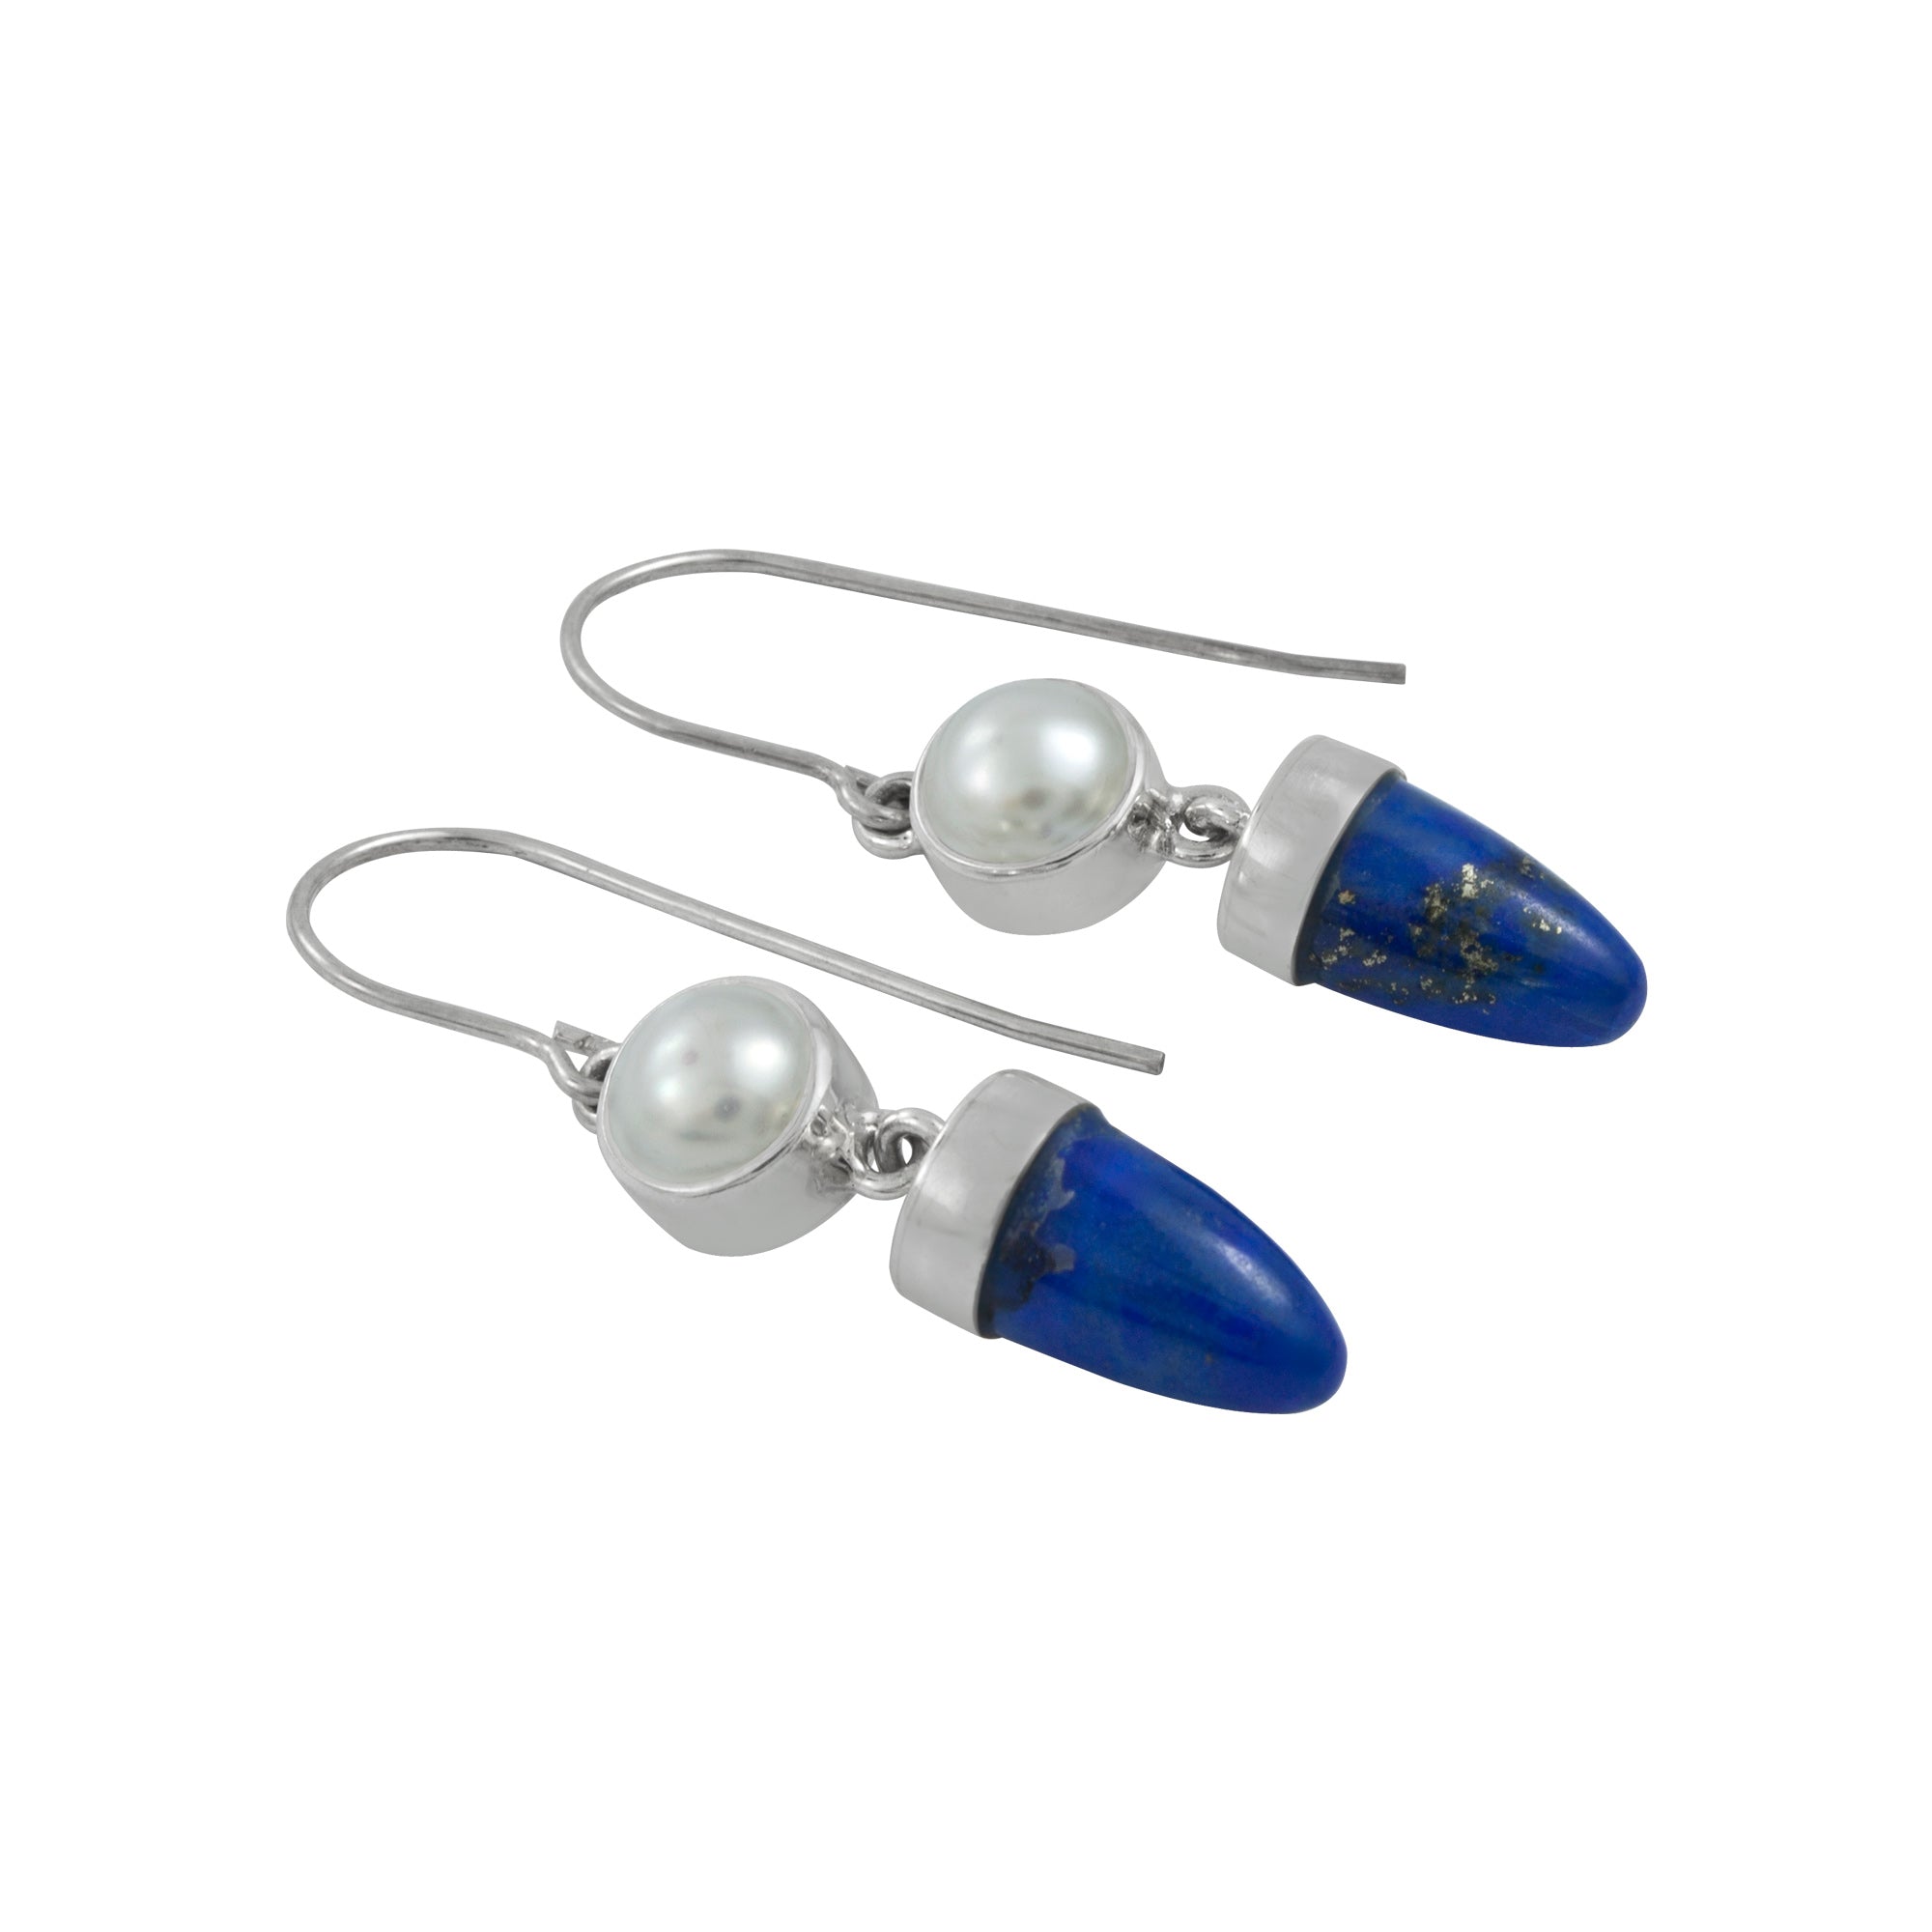 Stunning Simplicity Pearl and Lapis Earring